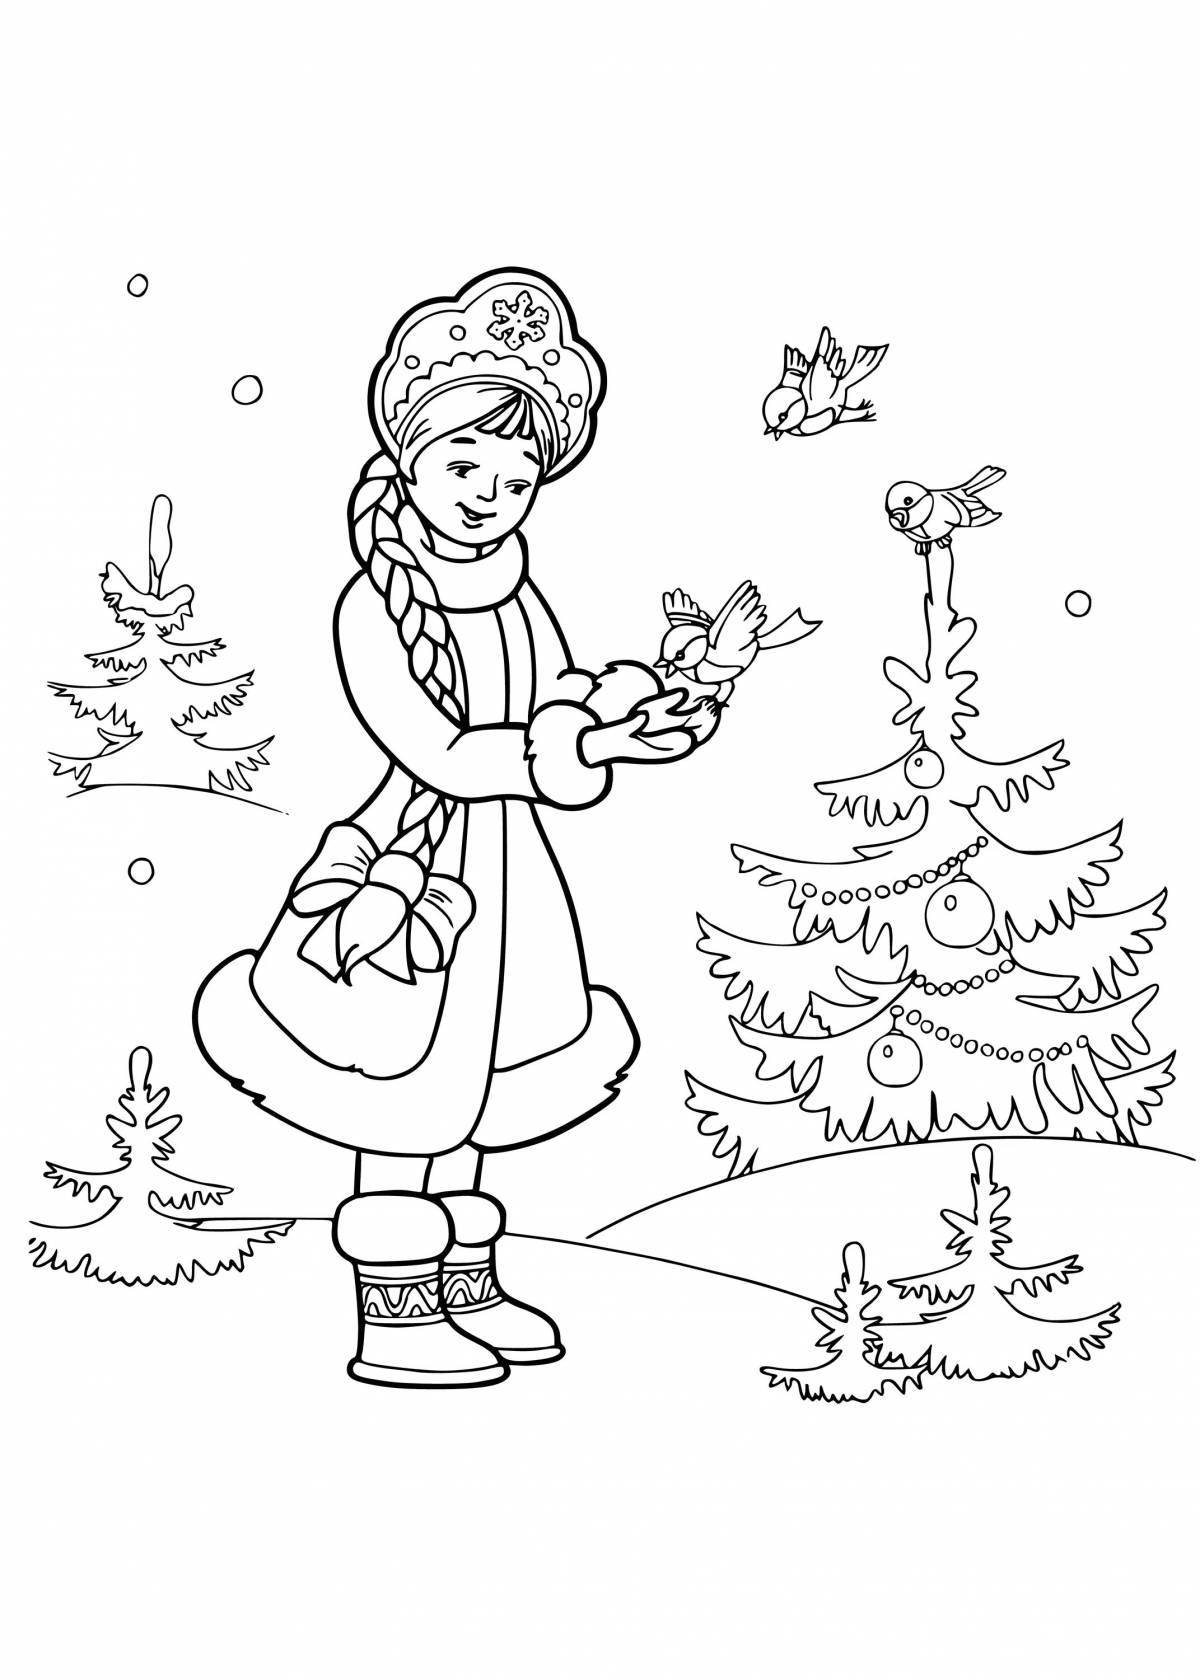 Snow Maiden live coloring